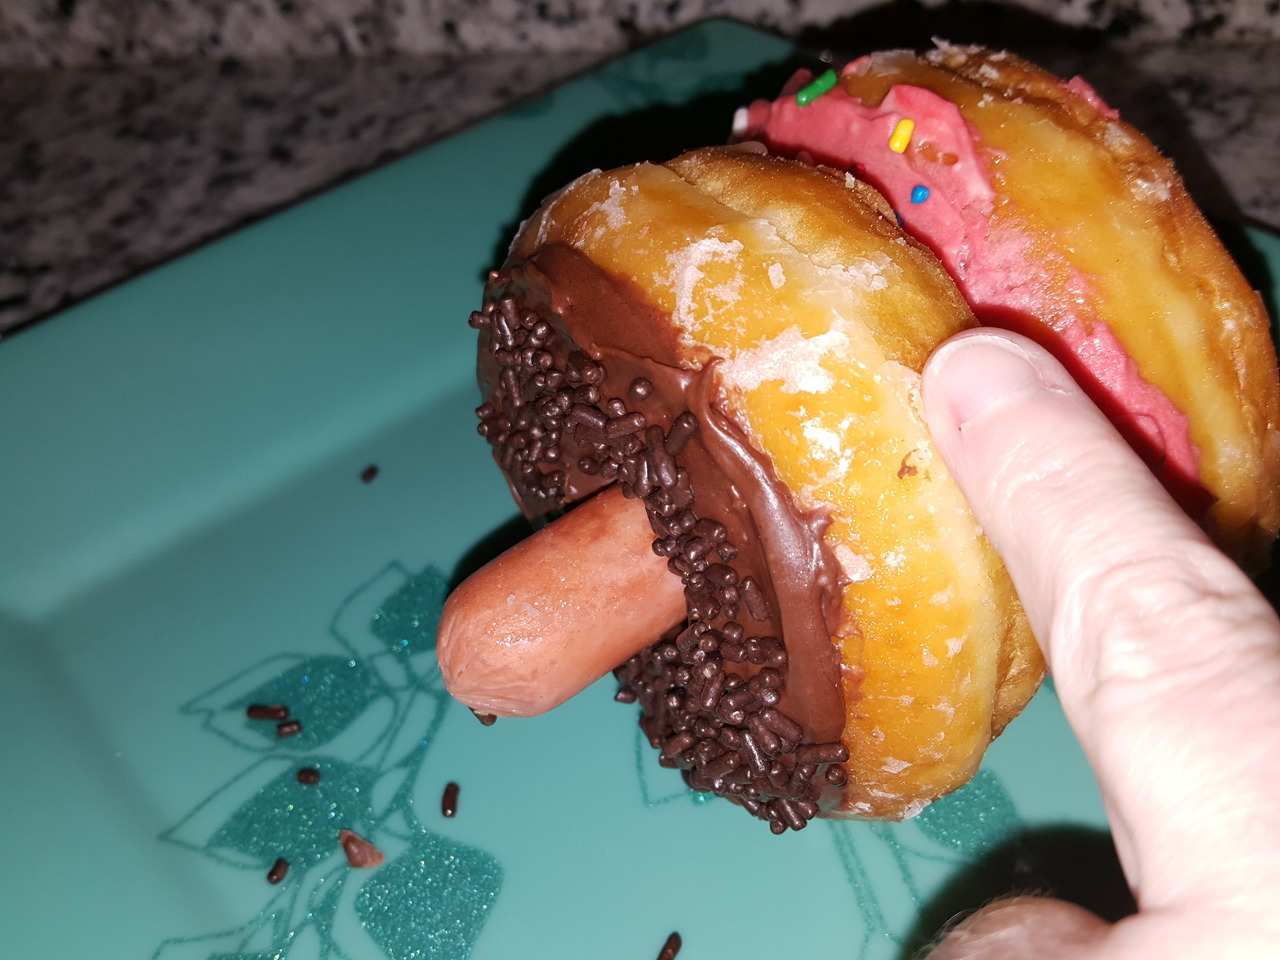 The Dog-NutYou probably don’t need specific instructions on how to make a Dog-Nut, but this photoset features store-bought donuts, Morningstar veggie dogs, and homemade chocolate and vanilla icing! I...